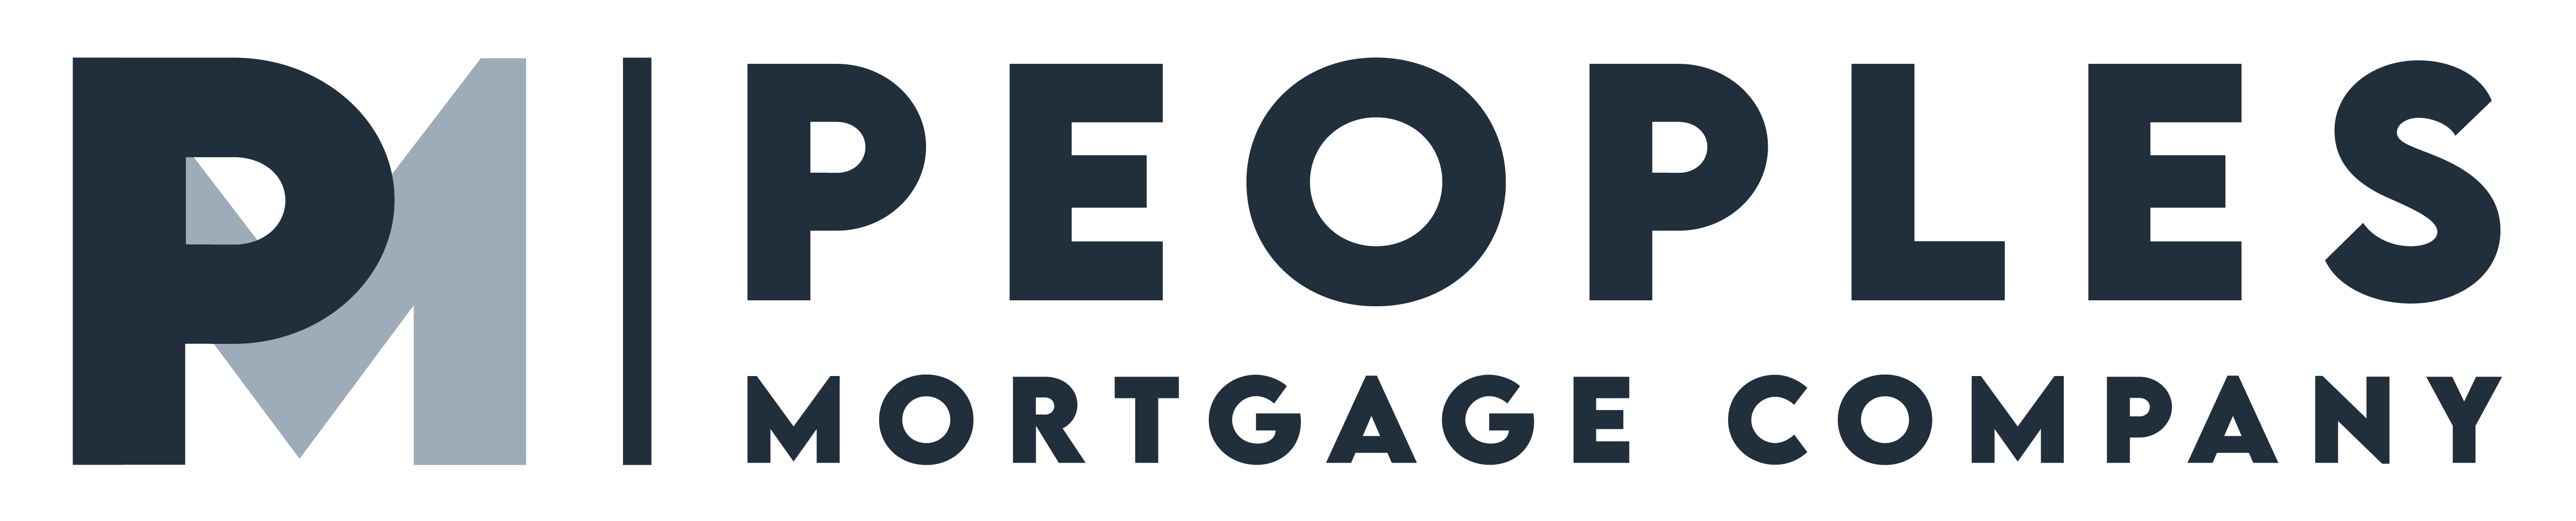 Peoples Mortgage logo